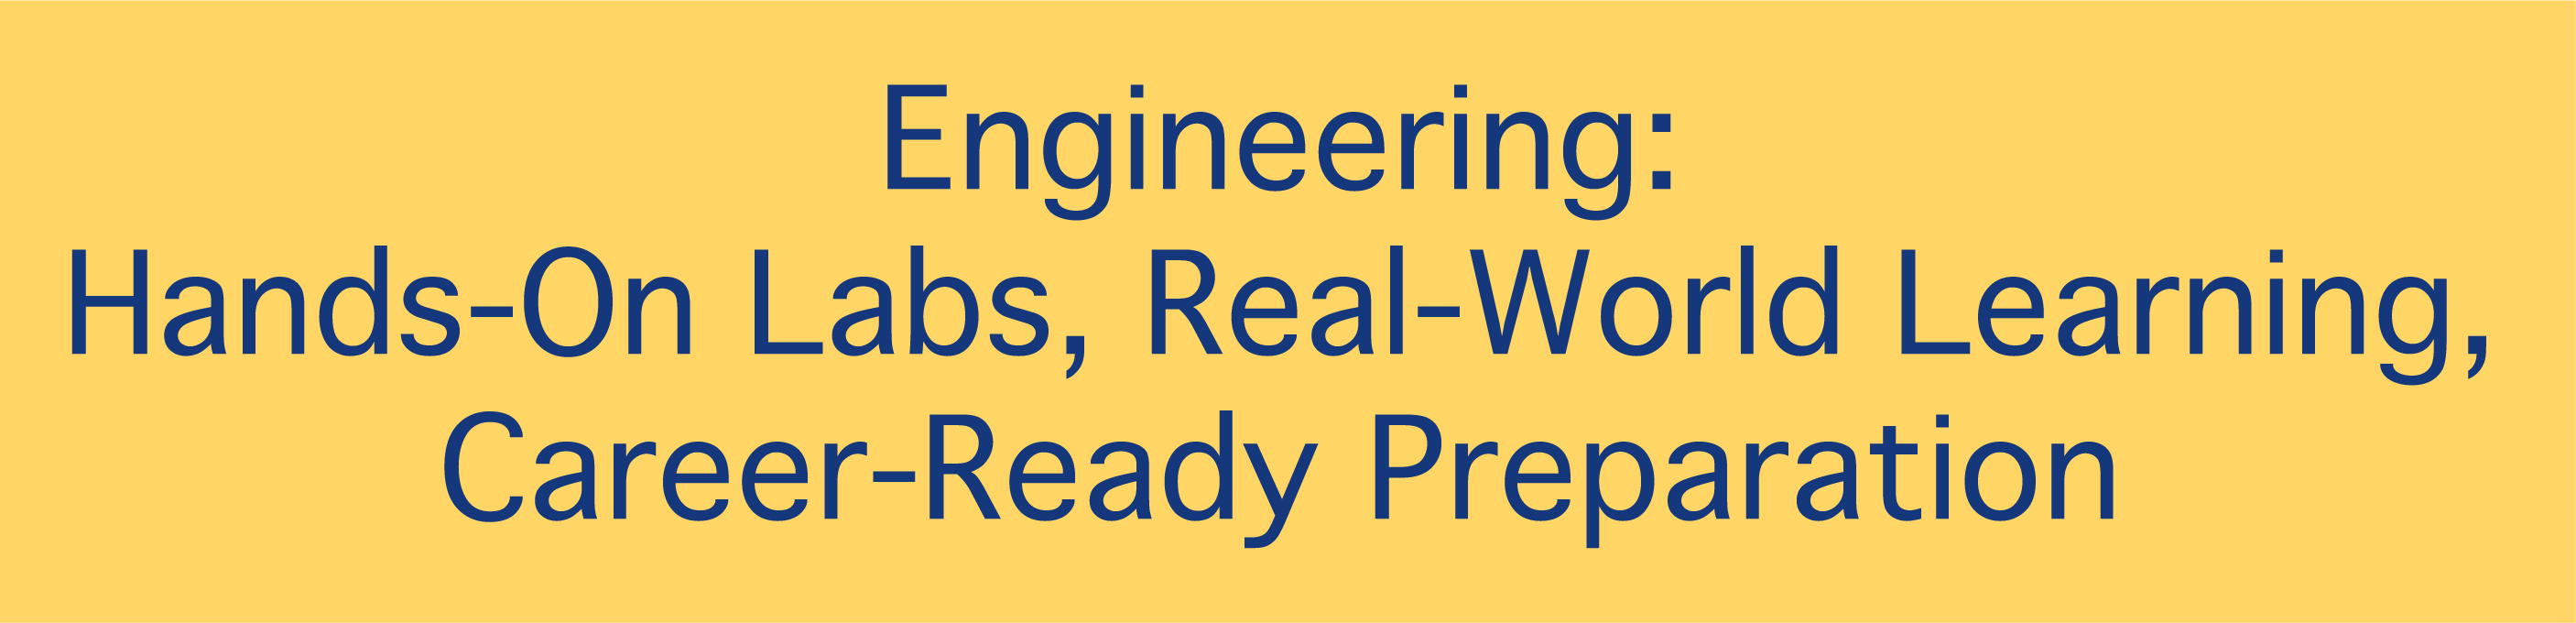 Engineering: Hands-On Labs, Real-World Learning, Career-Ready Preparation